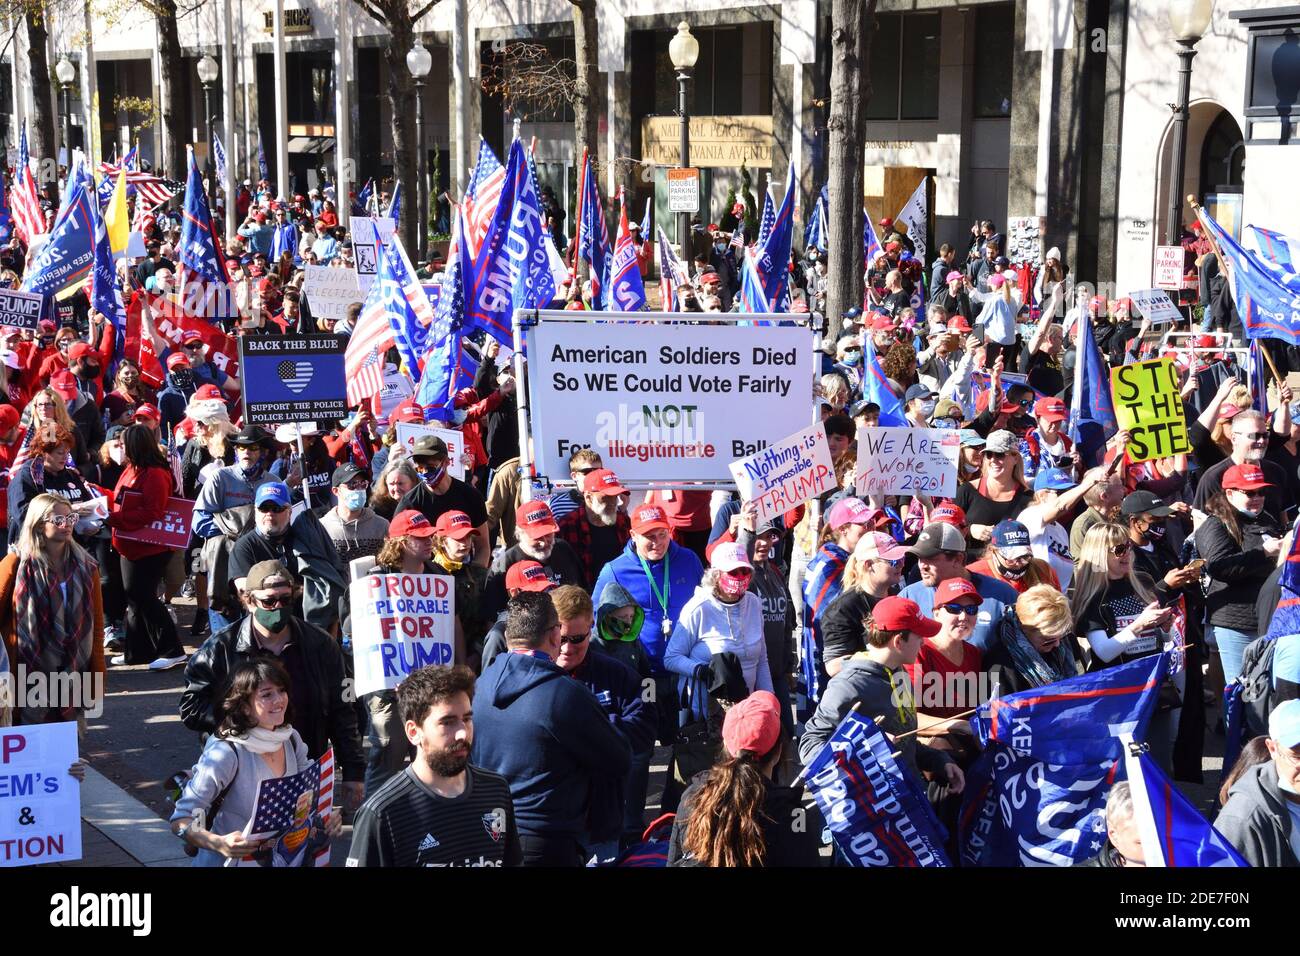 Washington DC. Nov 14, 2020. Million Maga March. Large group of peaceful Trump’s supporters with placards, signs and flags gathered at Freedom Plaza. Stock Photo